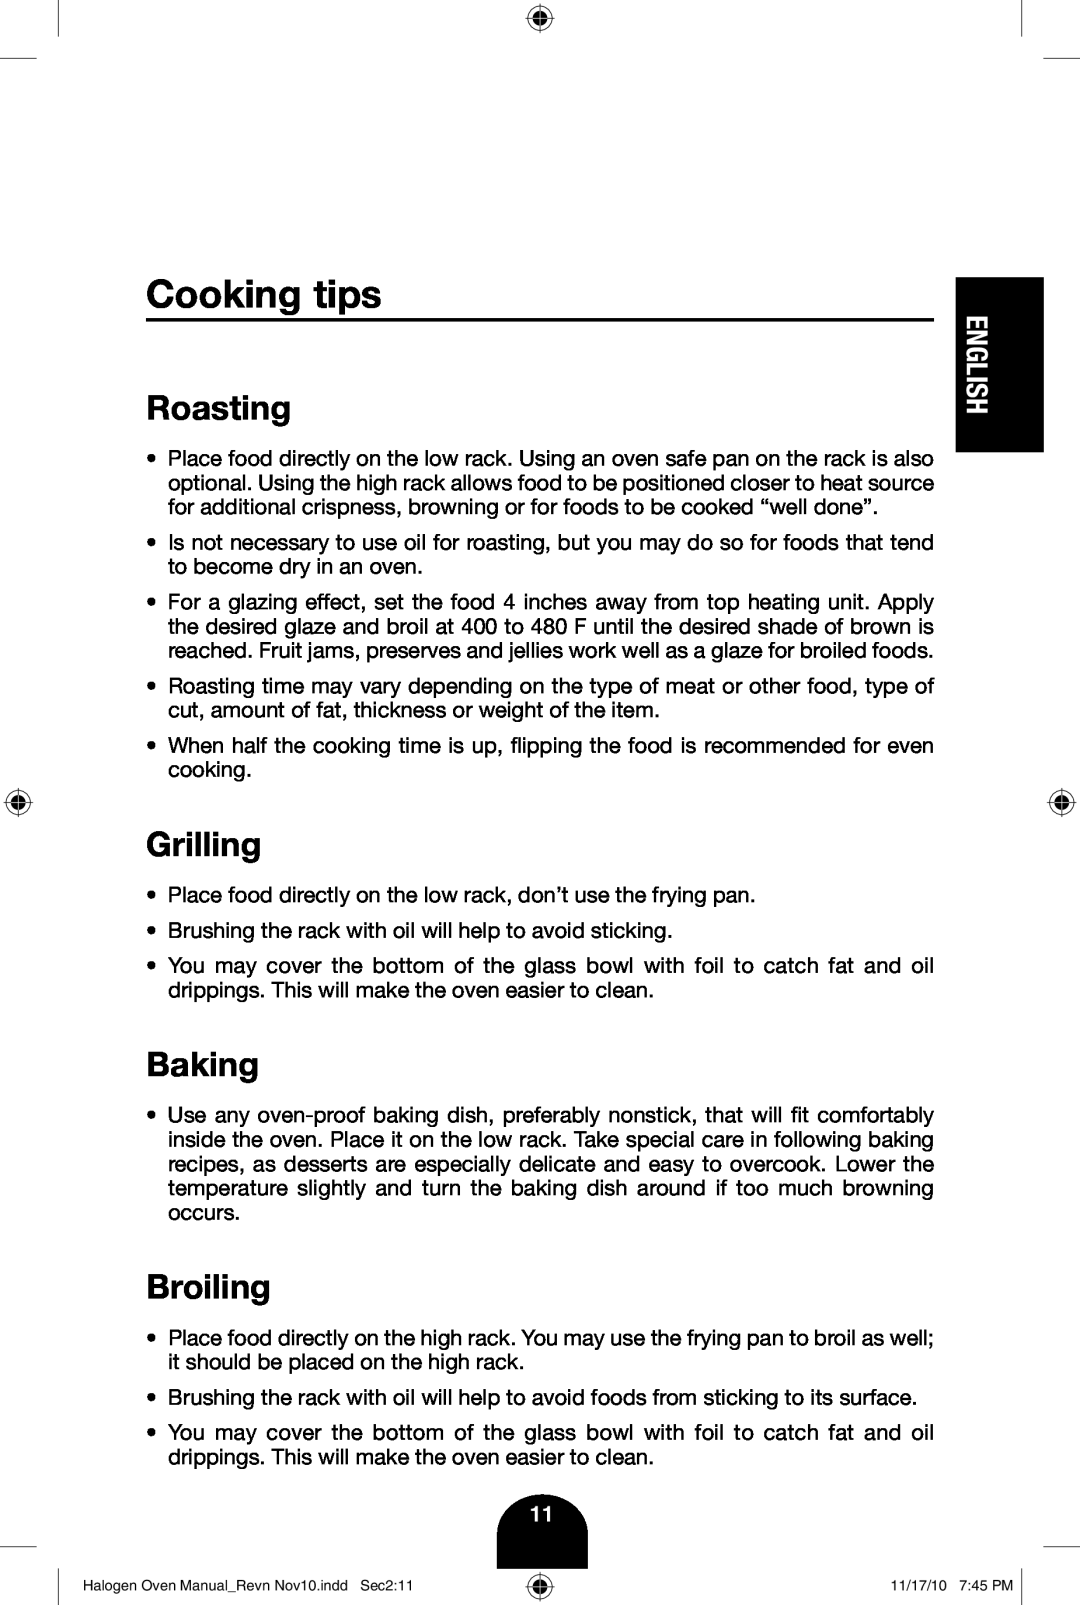 Fagor America 670040380 user manual Cooking tips, Roasting, Grilling, Baking, Broiling, English 